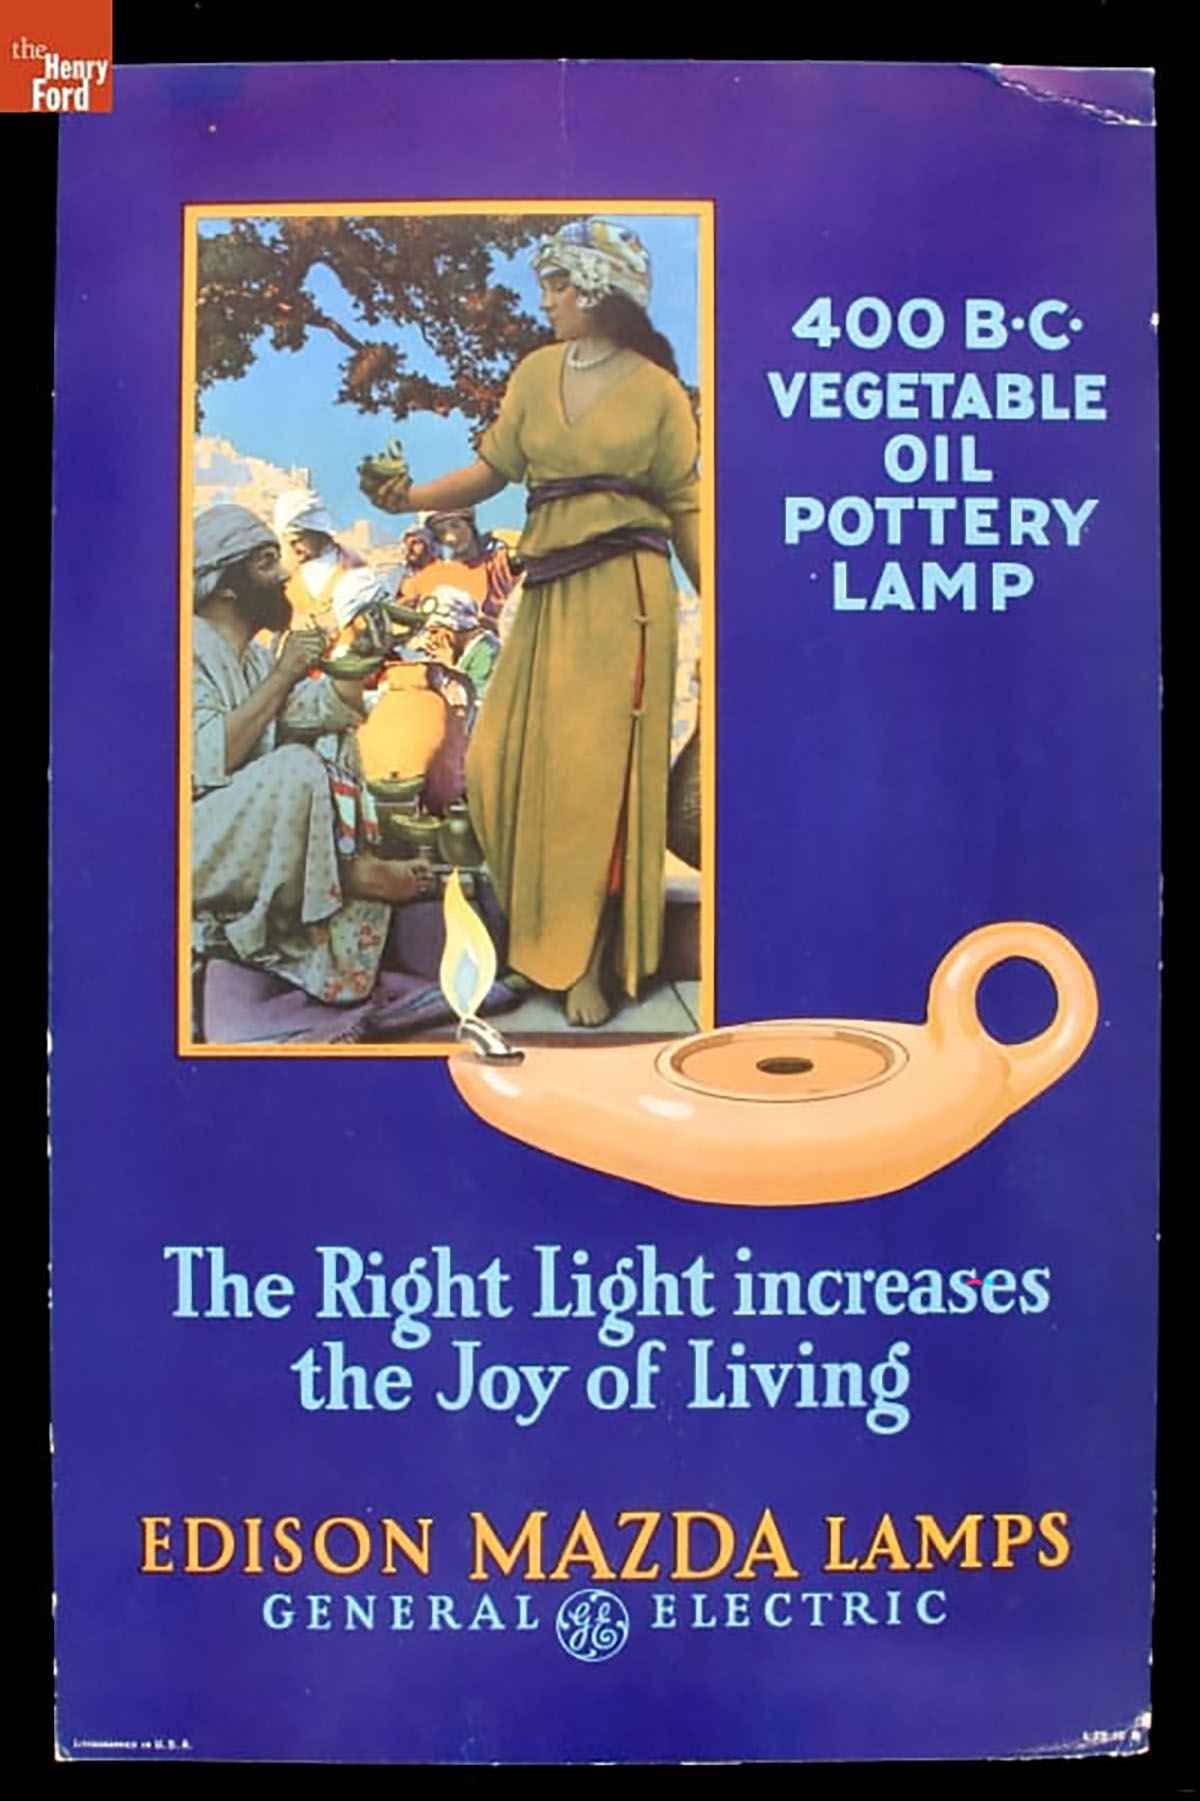 Advertising Poster for Edison Mazda Lamps, 'The Right Light Increases the Joy of Living,' circa 1922.